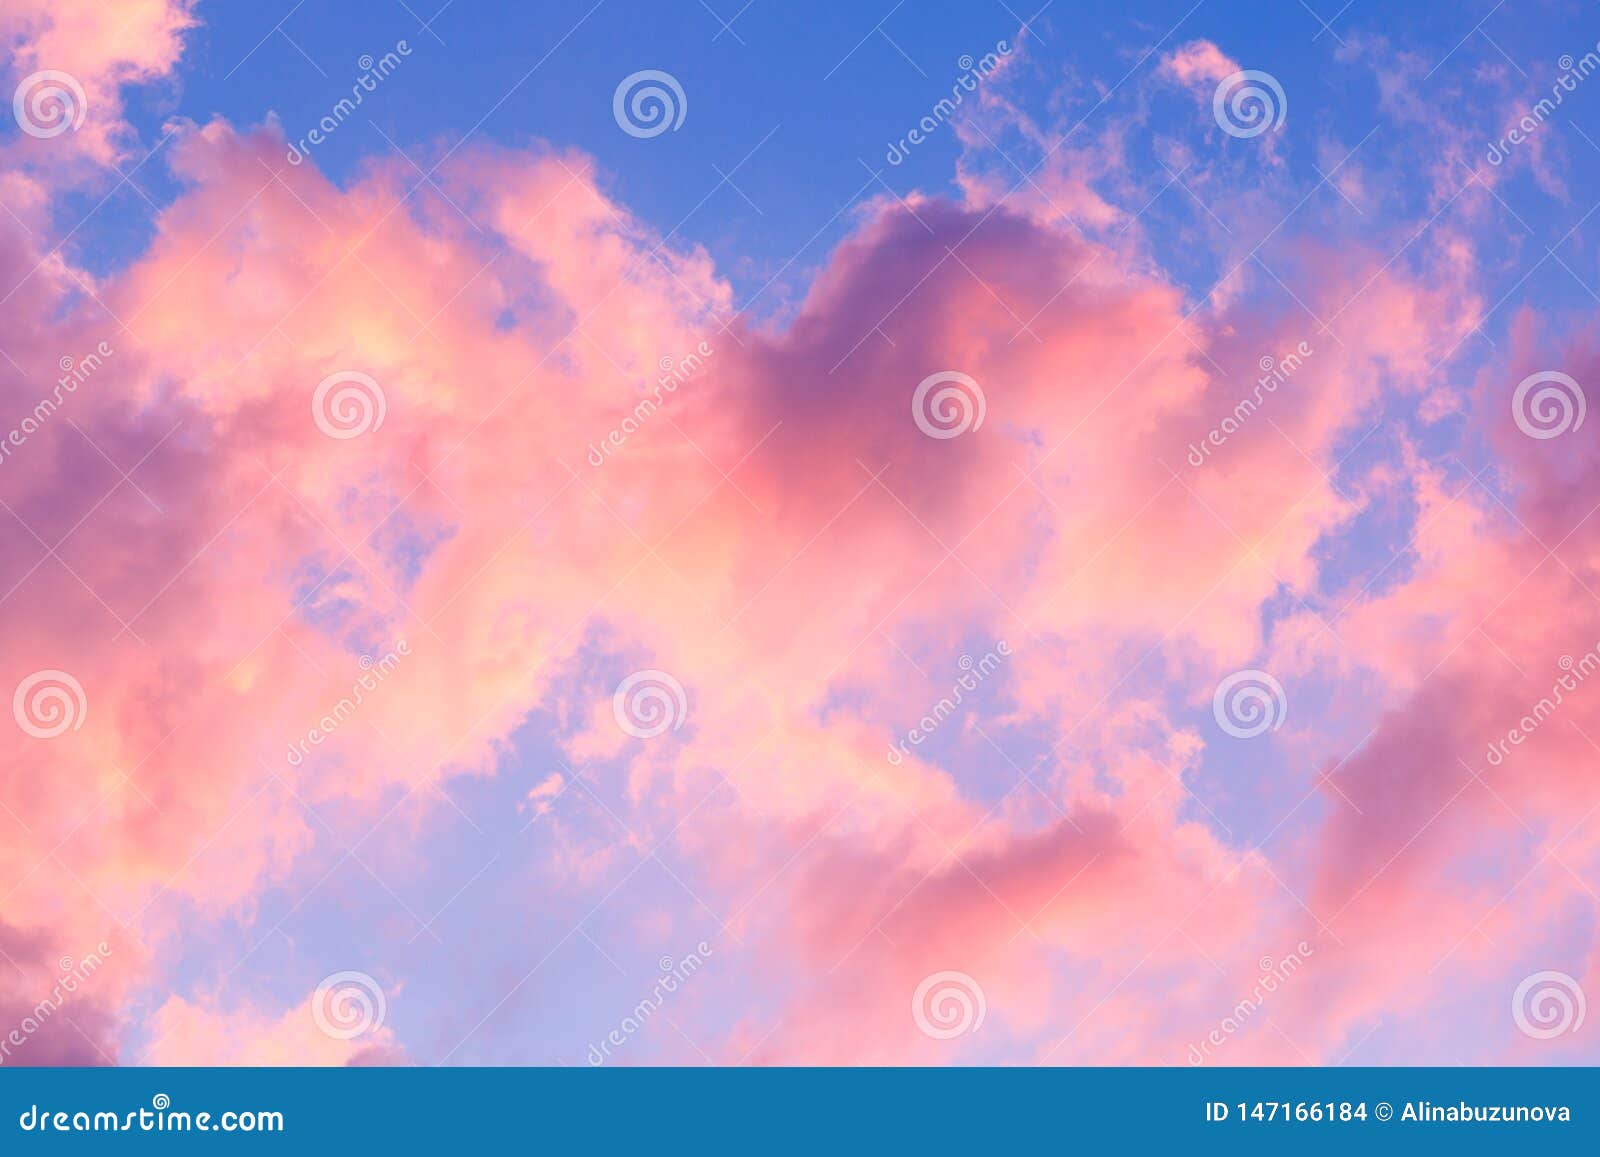 Blue Sky Clouds, Background of Purple Sunset Sky Stock Photo - Image of  ocean, horizontal: 147166184